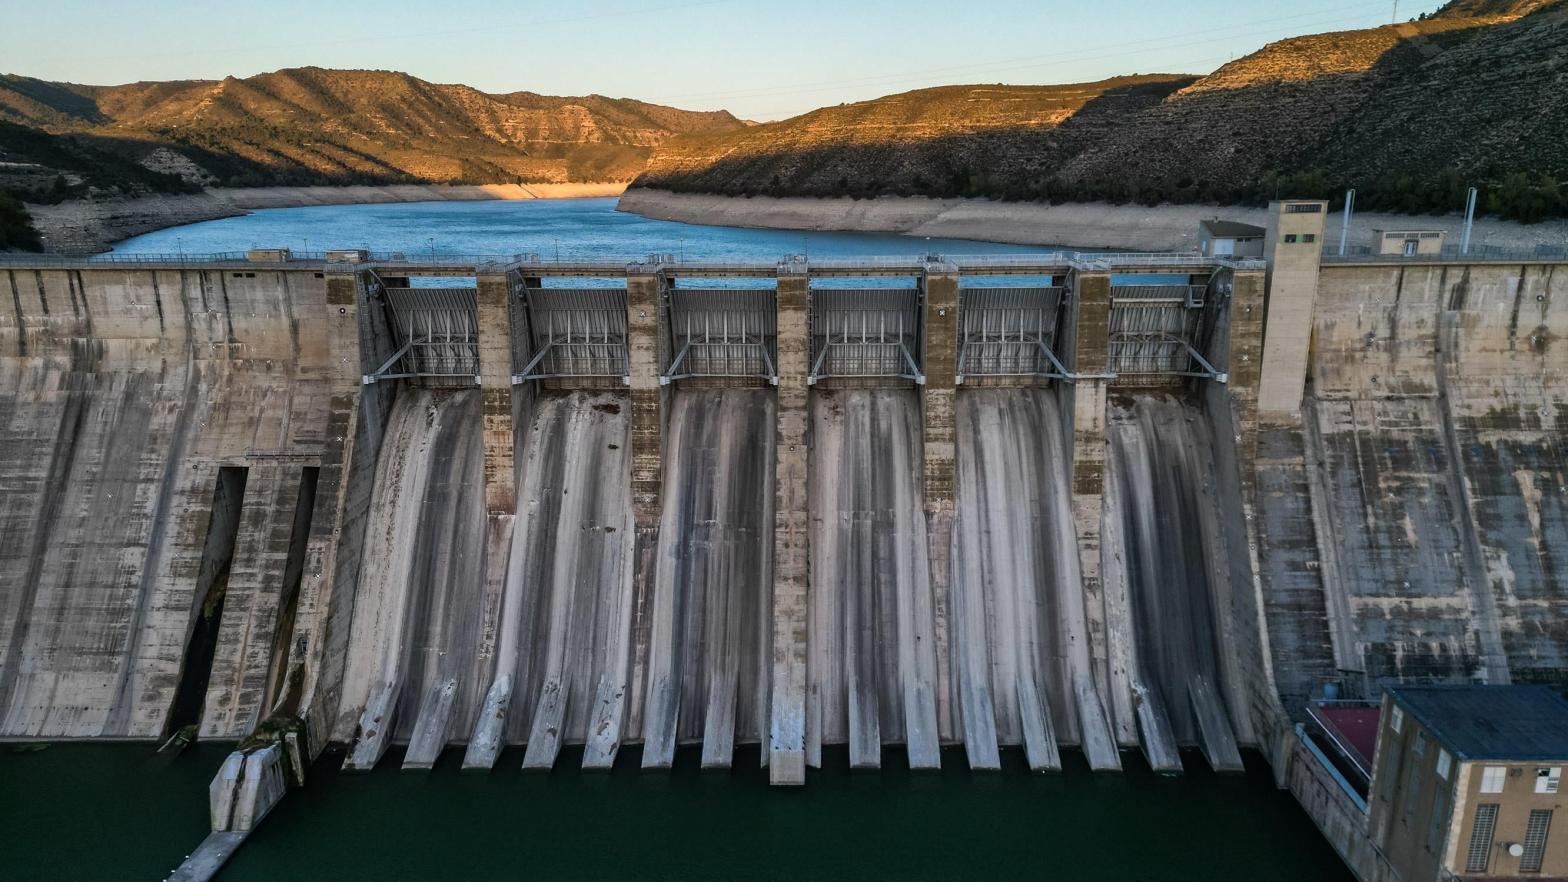 Sunrise on the dam in Mequinenza, Spain. (Photo: Zowy Voeten, Getty Images)